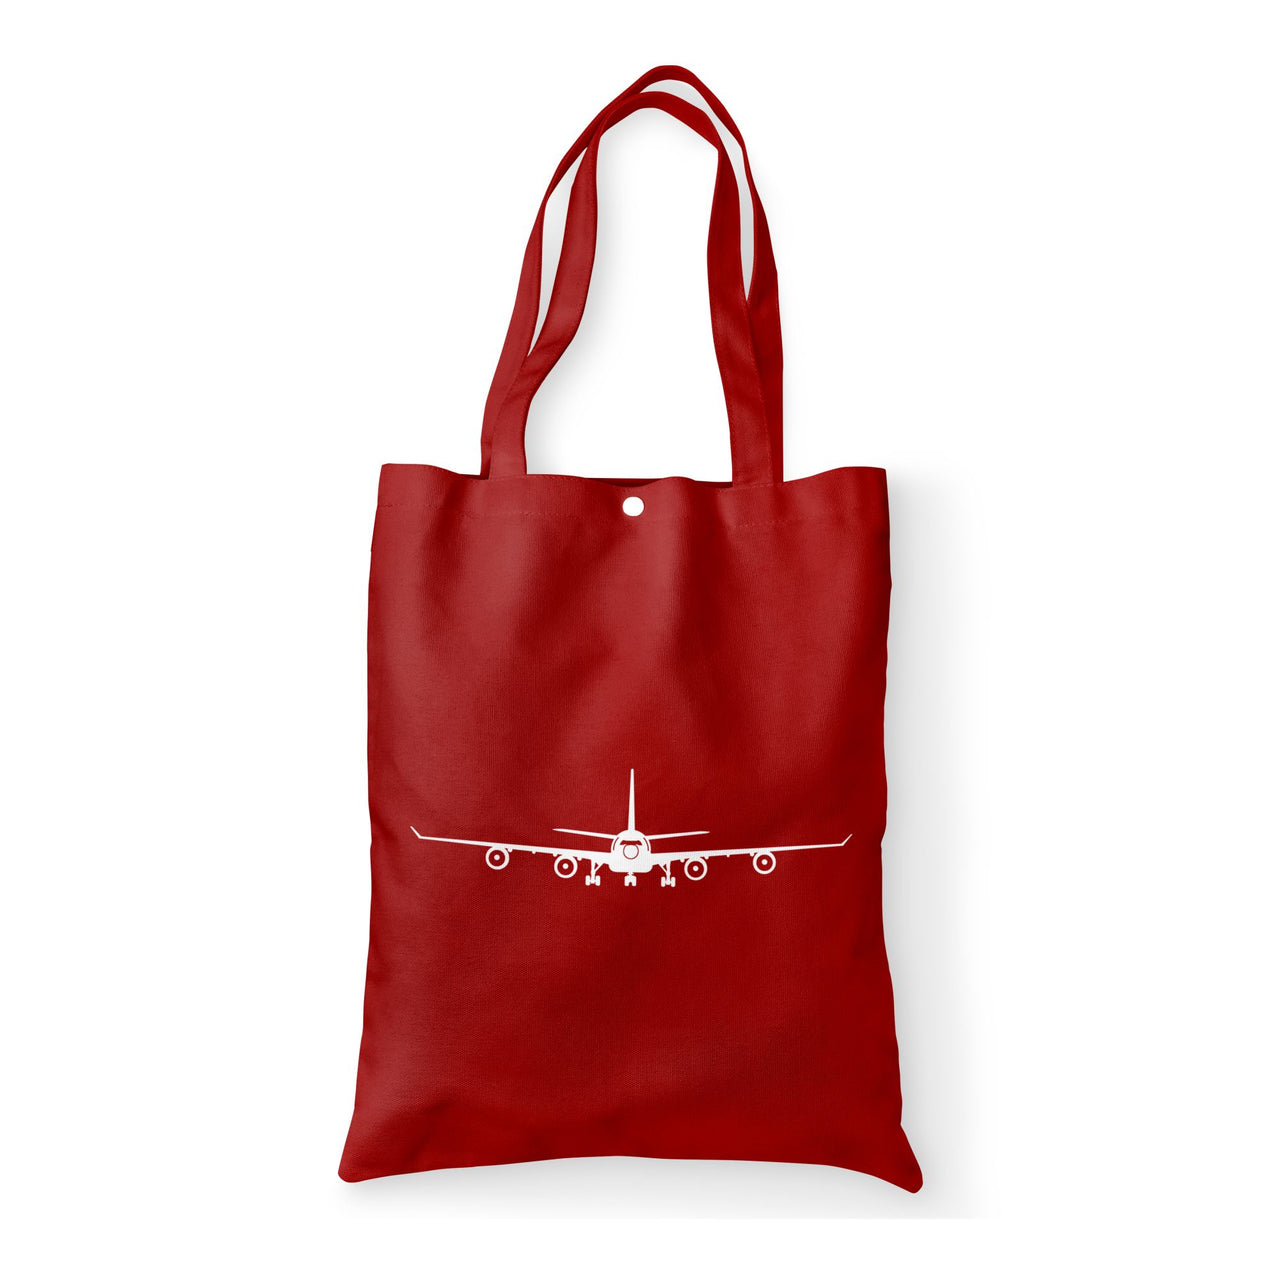 Airbus A340 Silhouette Designed Tote Bags